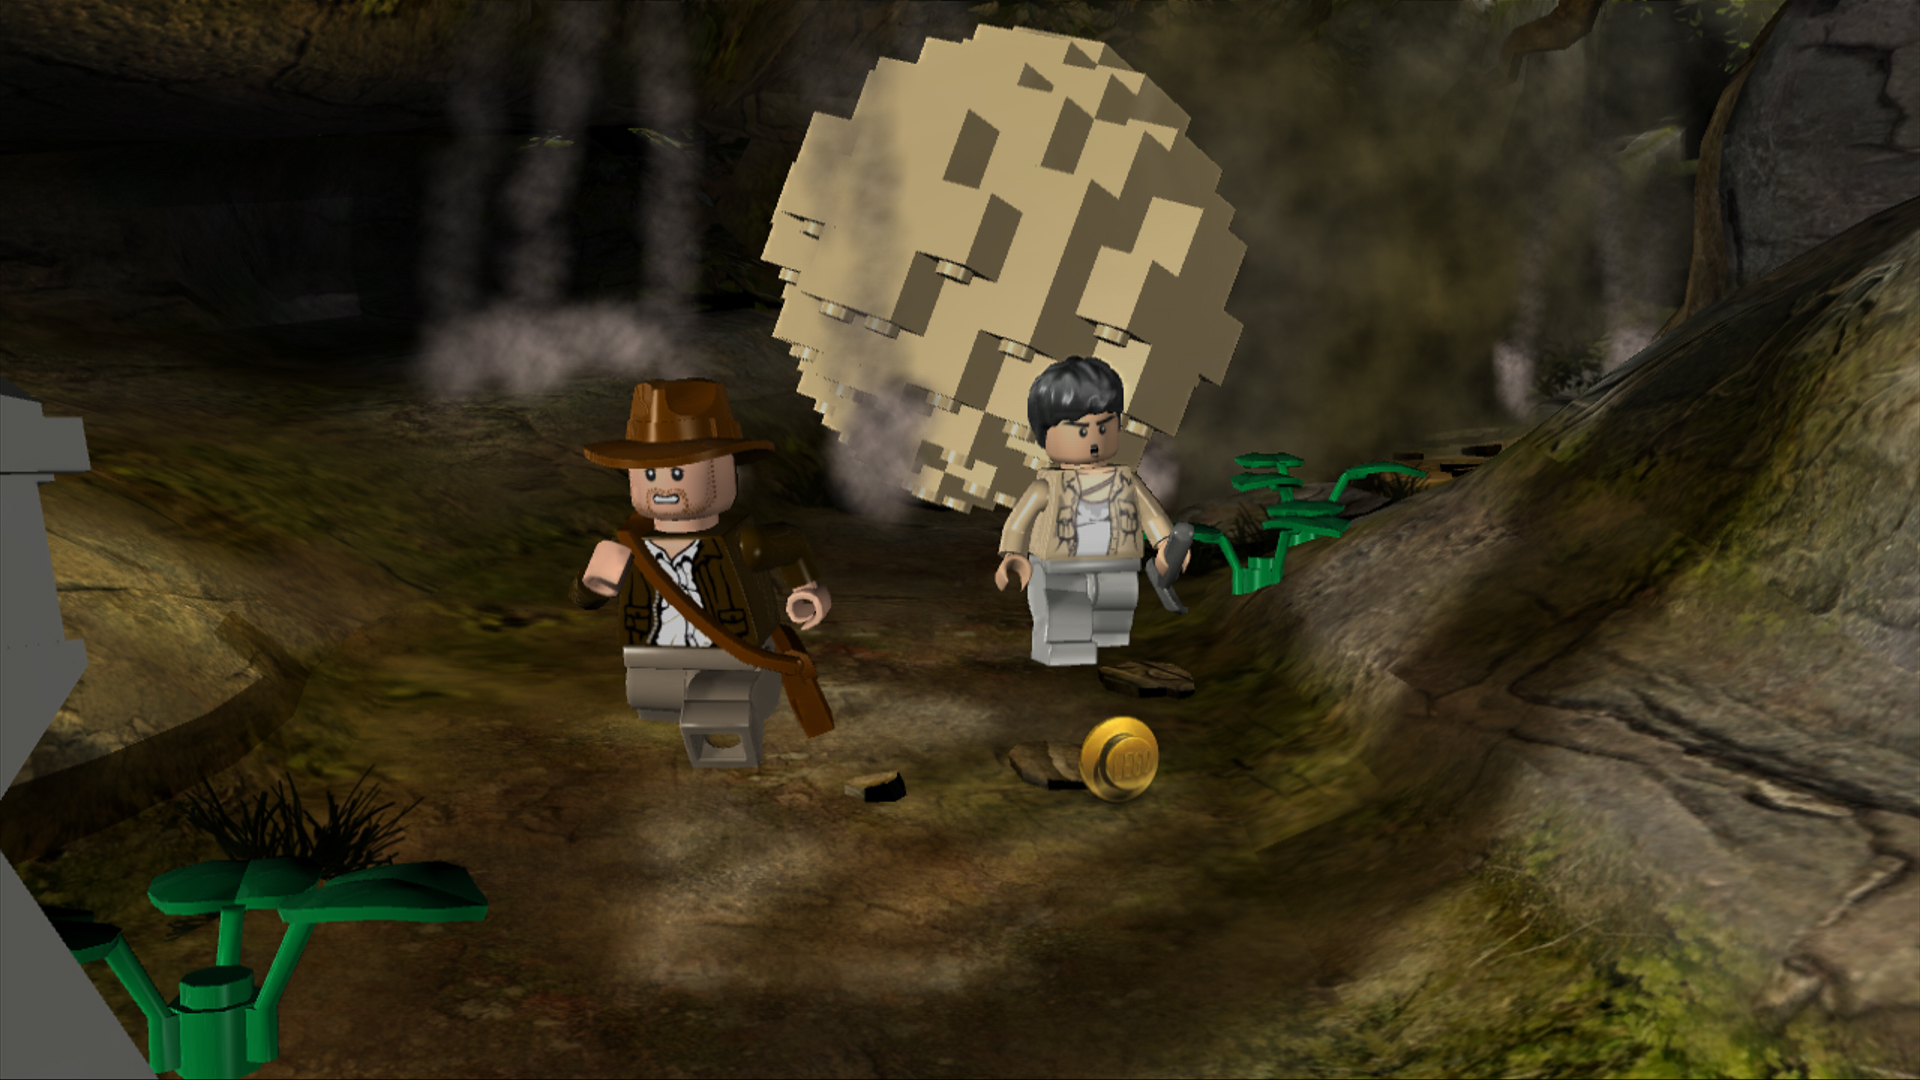 Lego Indiana Jones Pictures   Wallpaper High Definition High Quality